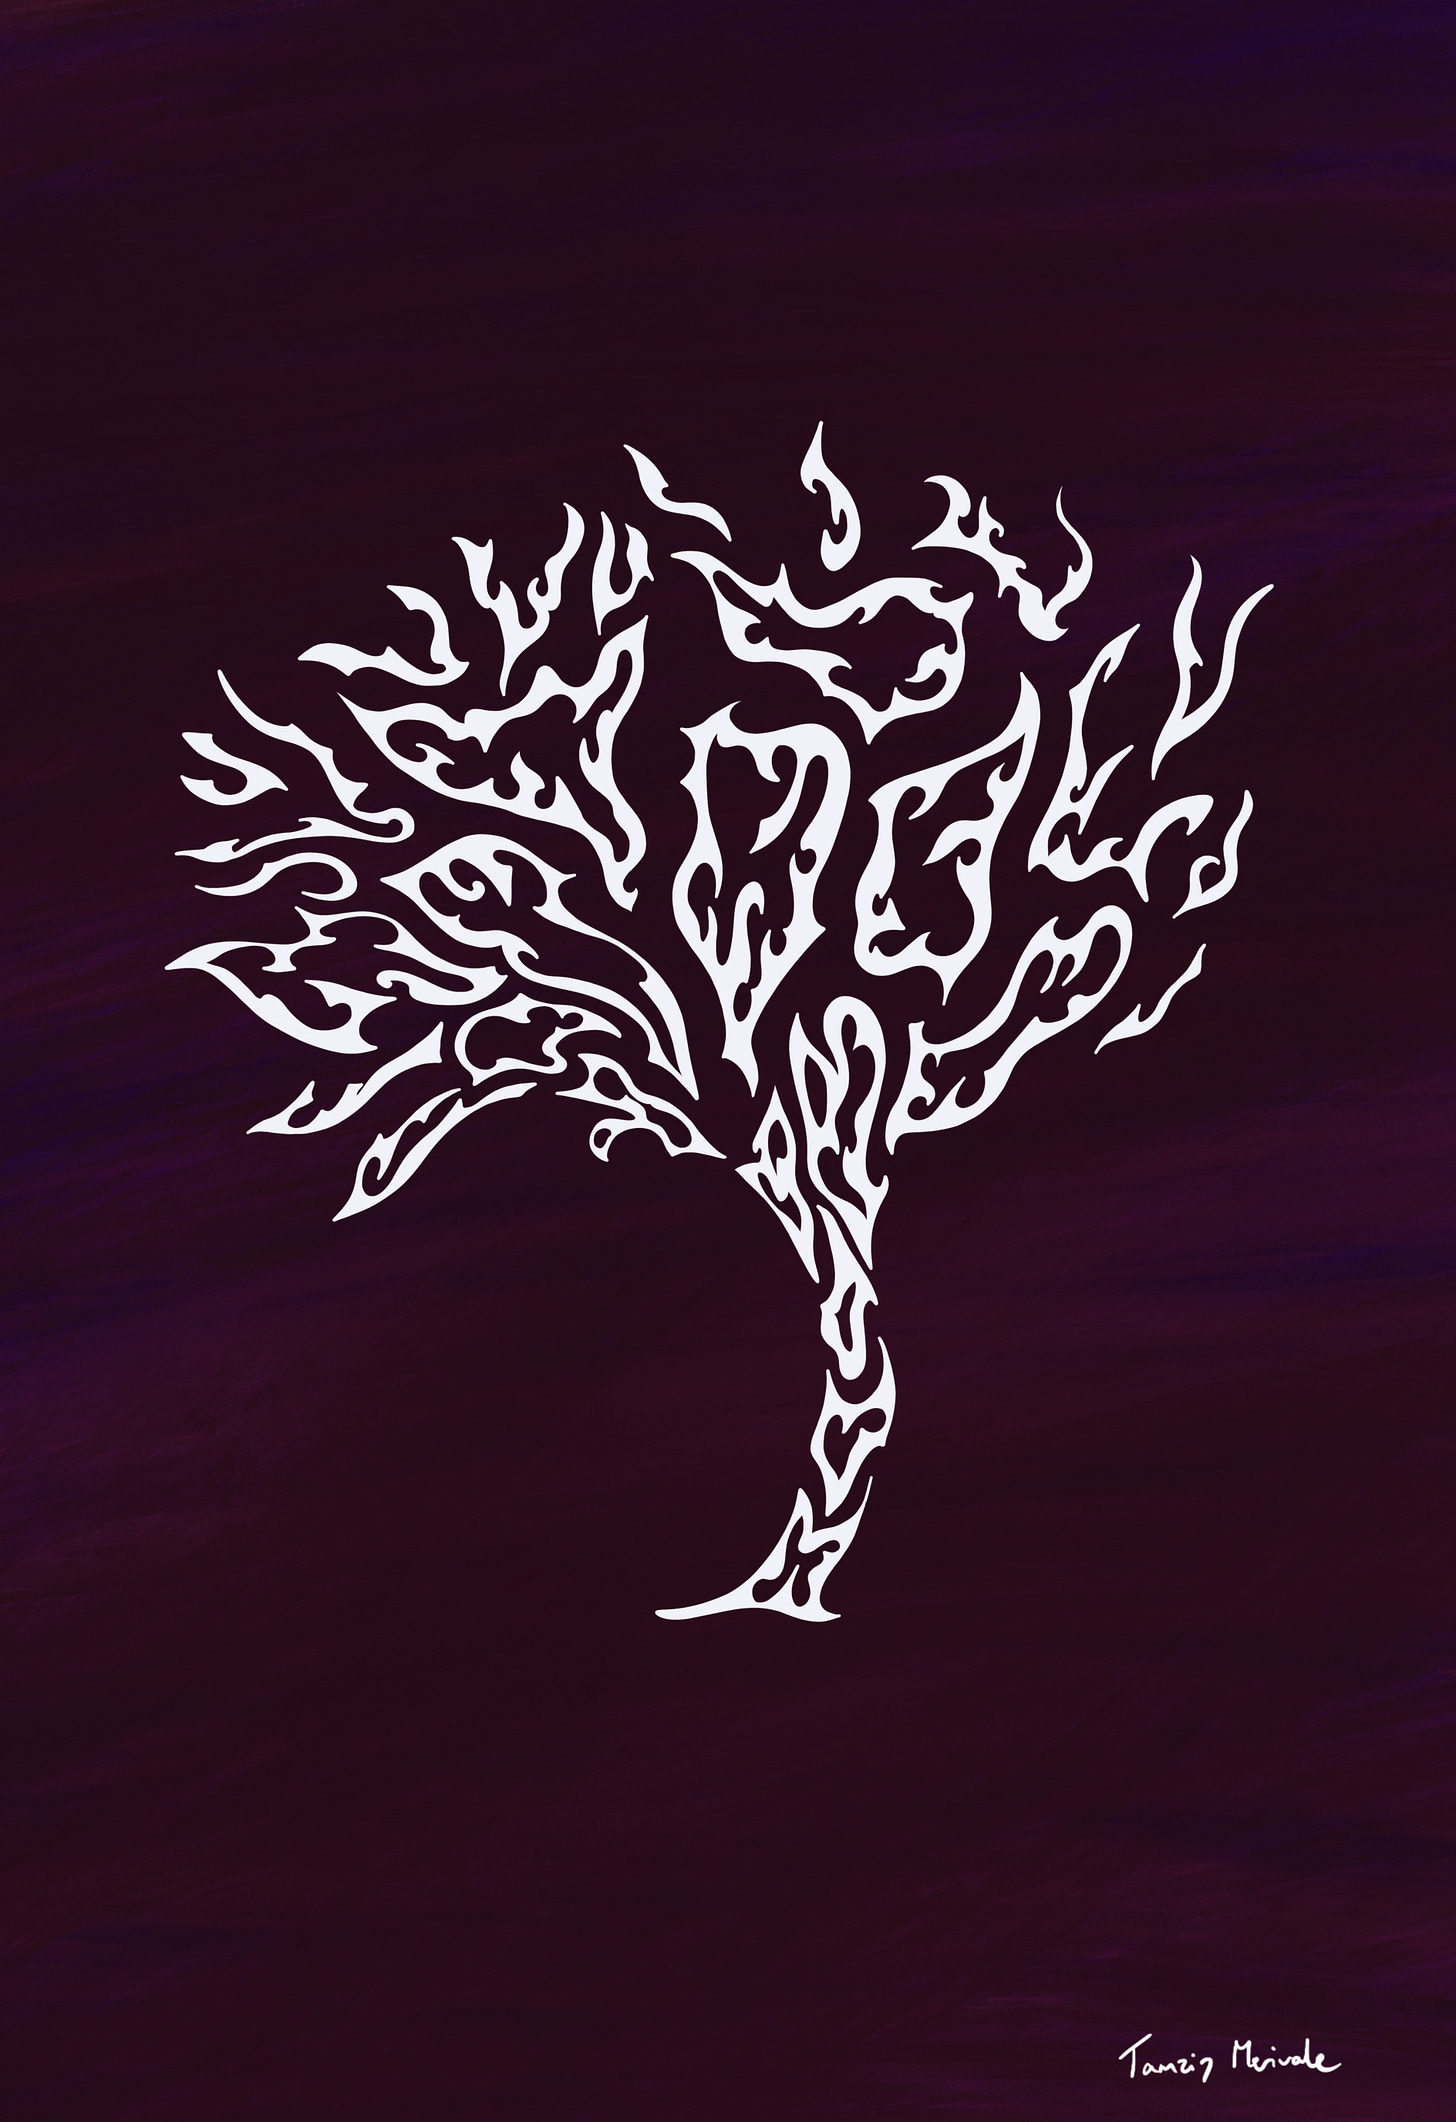 White illustrated tree in a pattern on dark purple background